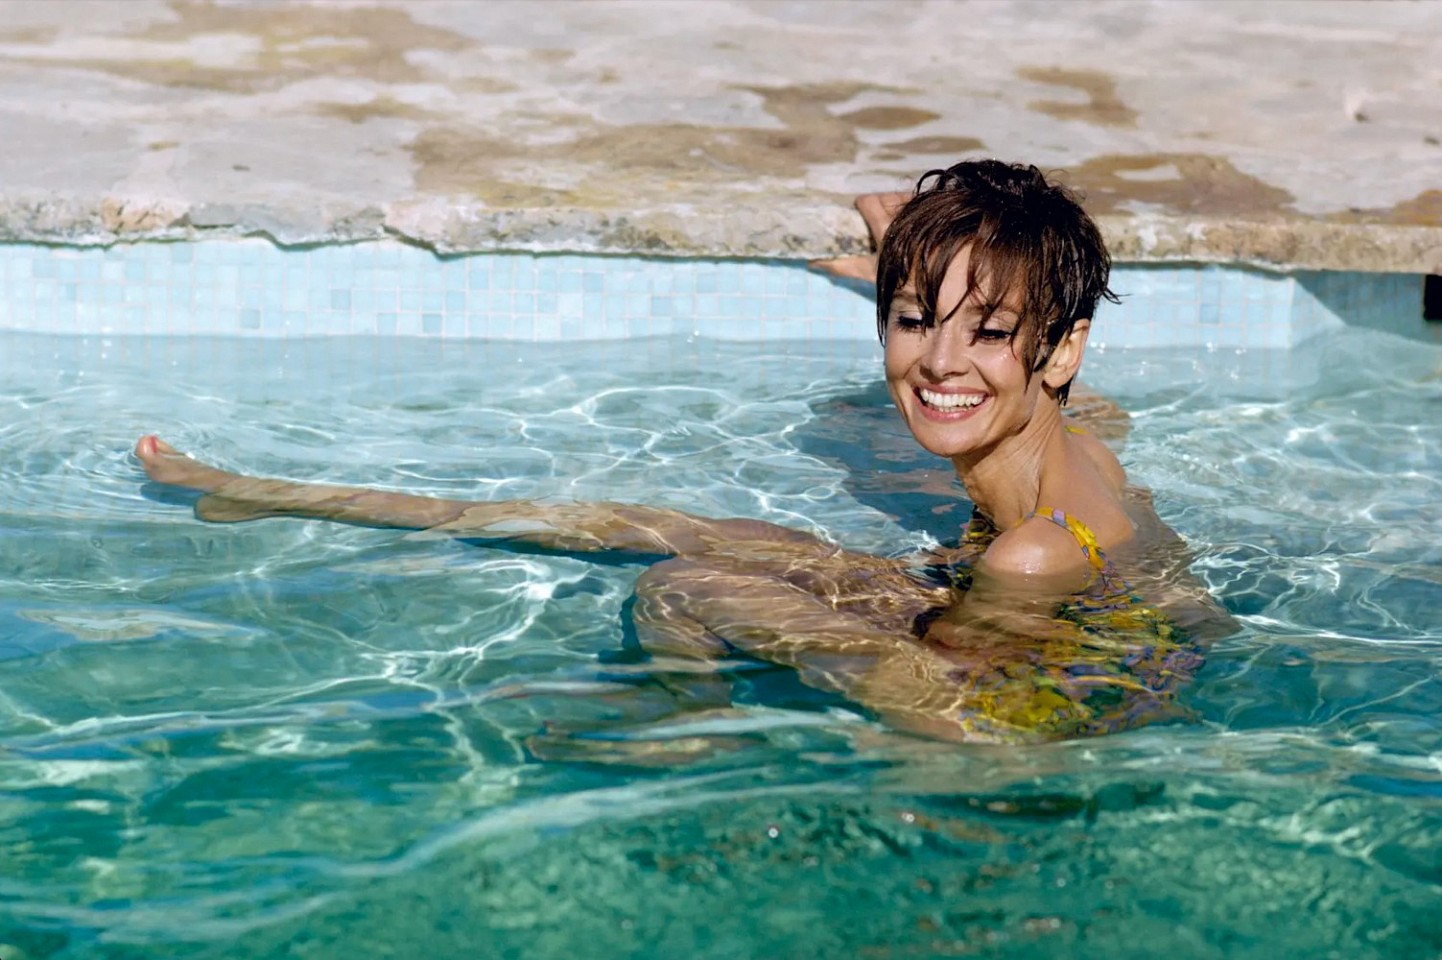 Terry O&#039;Neill, Audrey Hepburn on the Set of "Two for the Road," Ed. of 50, 1966
C-Type Print, 16 x 20 in.